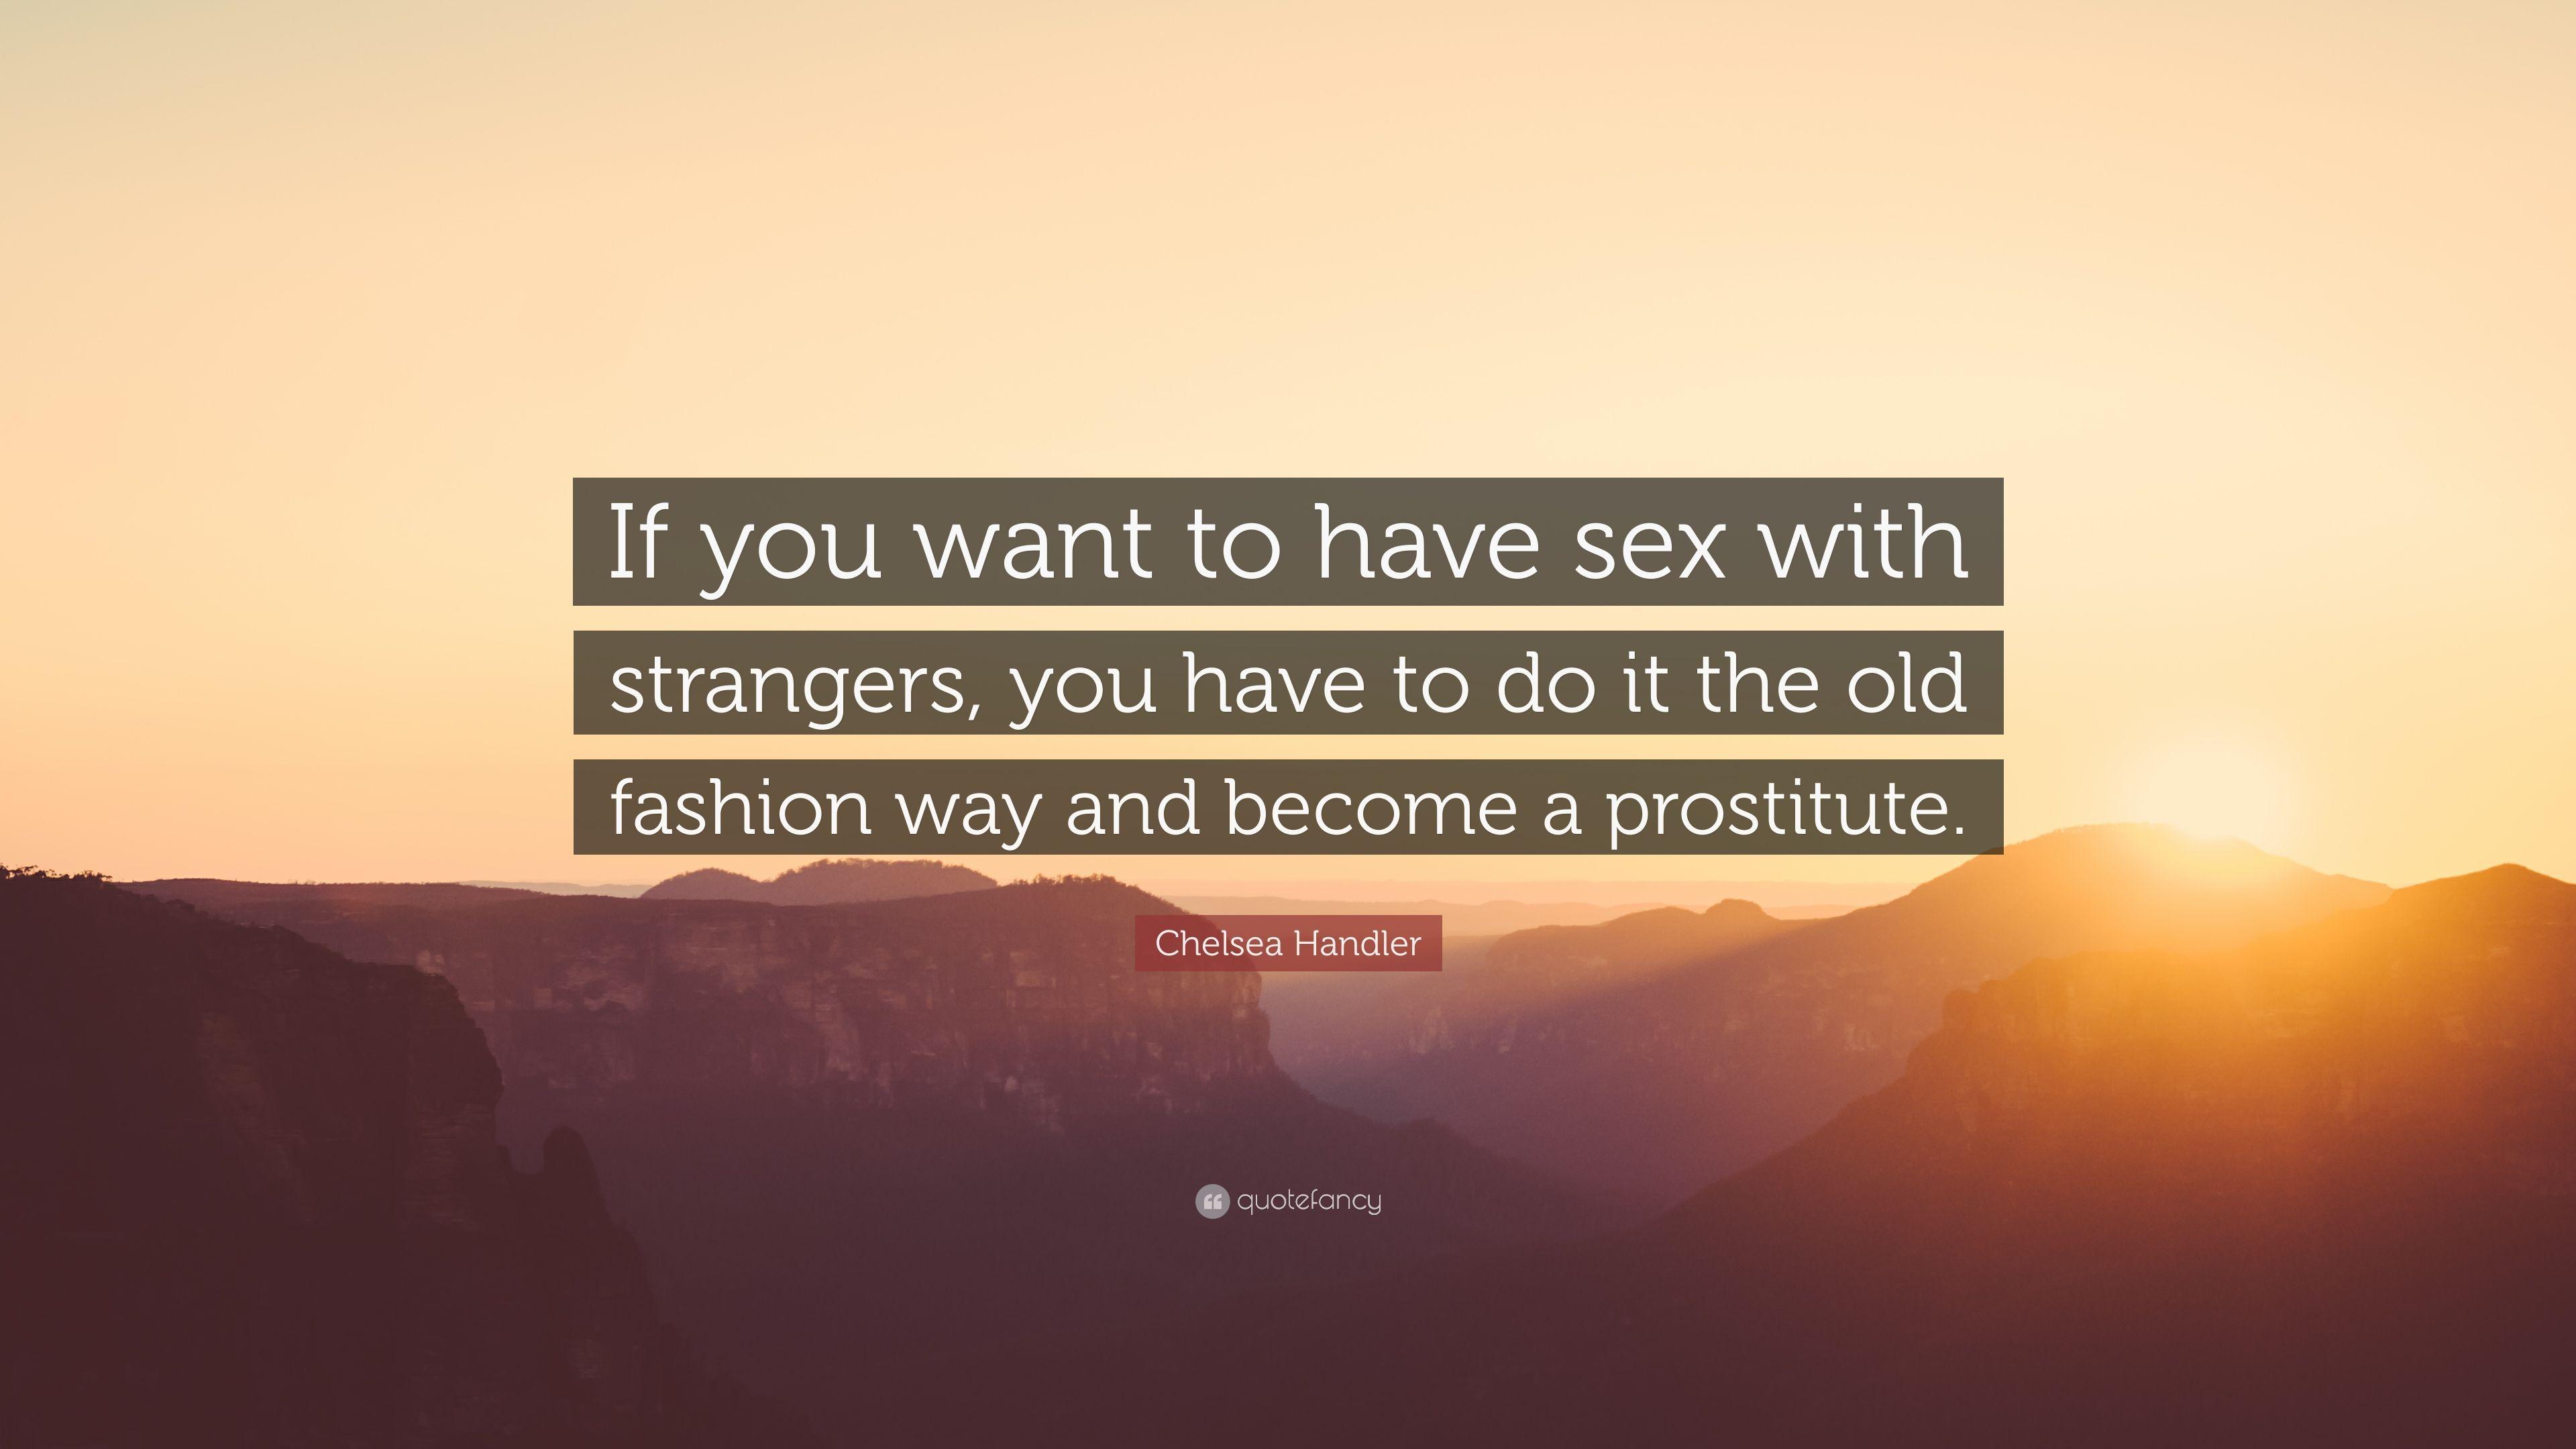 Chelsea Handler Quote: “If you want to have sex with strangers